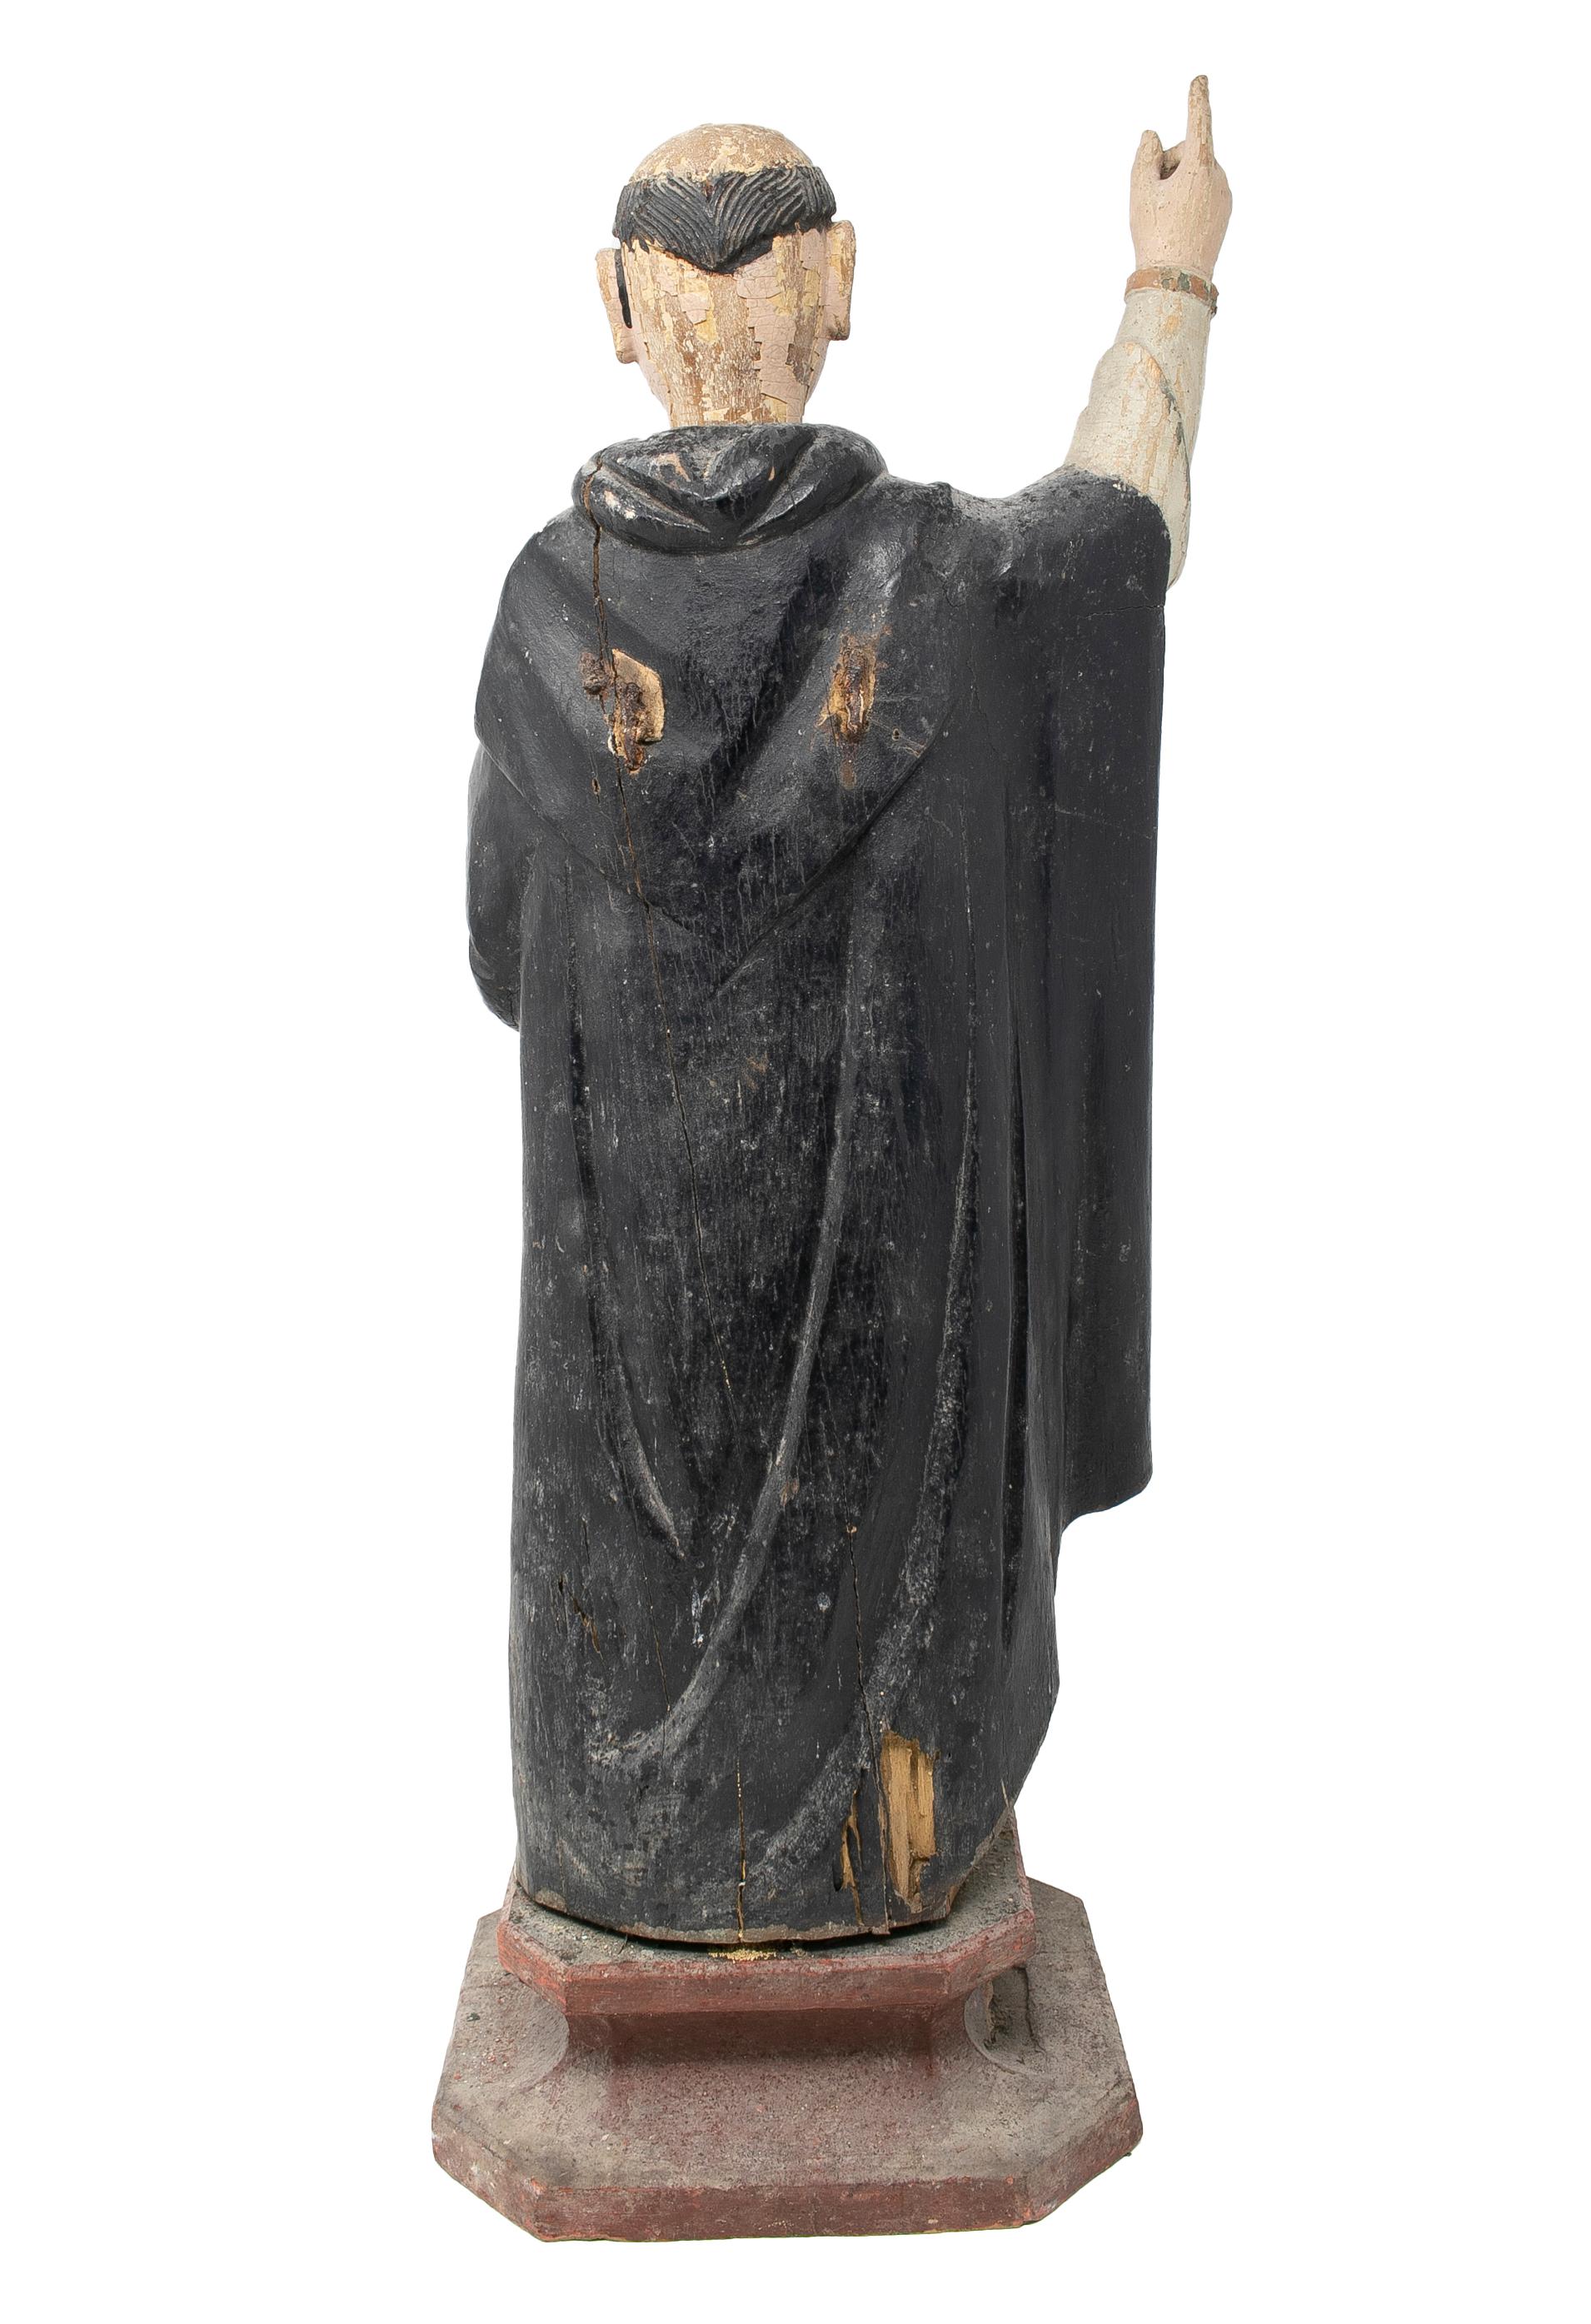 Mid-19th Century Spanish Saint Painted Wooden Figurative Sculpture For Sale 1